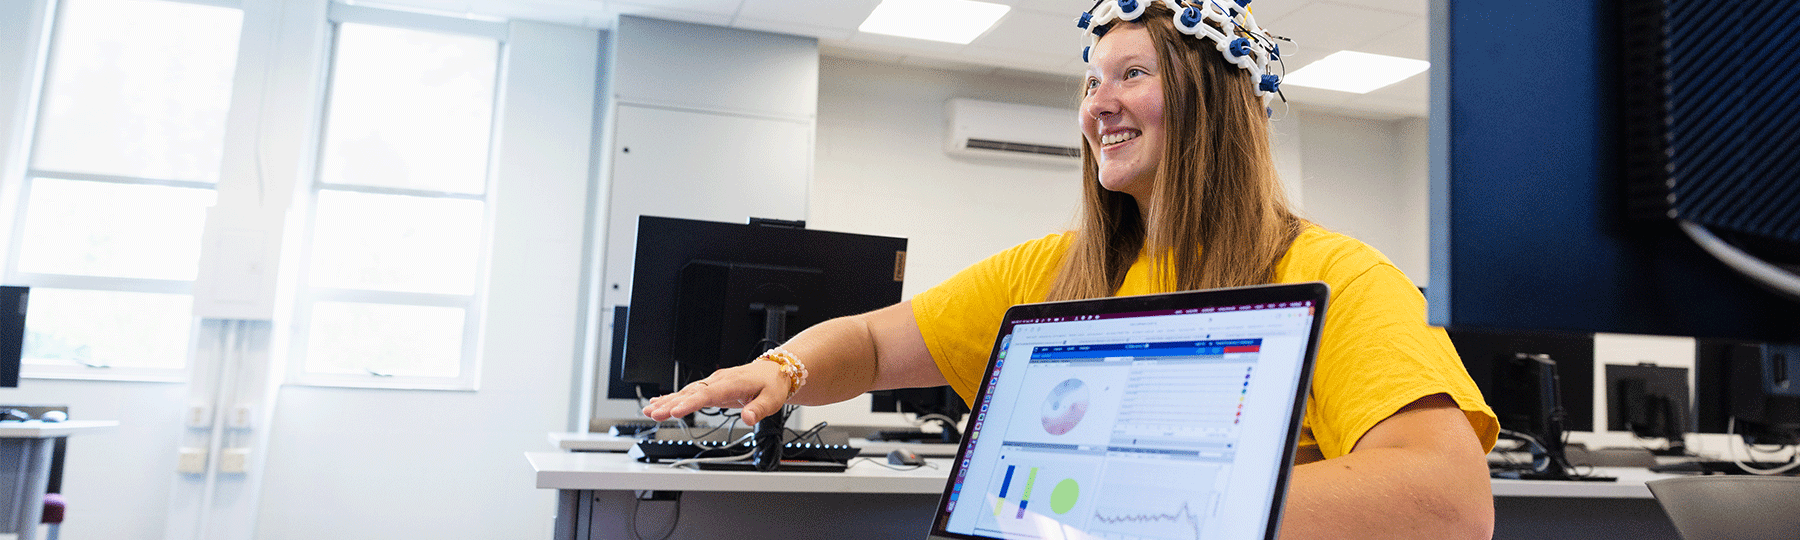 A student sitting in a classroom, with a tool on her head that is a white cap with blue dots, as she raises her hand and a computer is on the table in front of her showing charts and data.